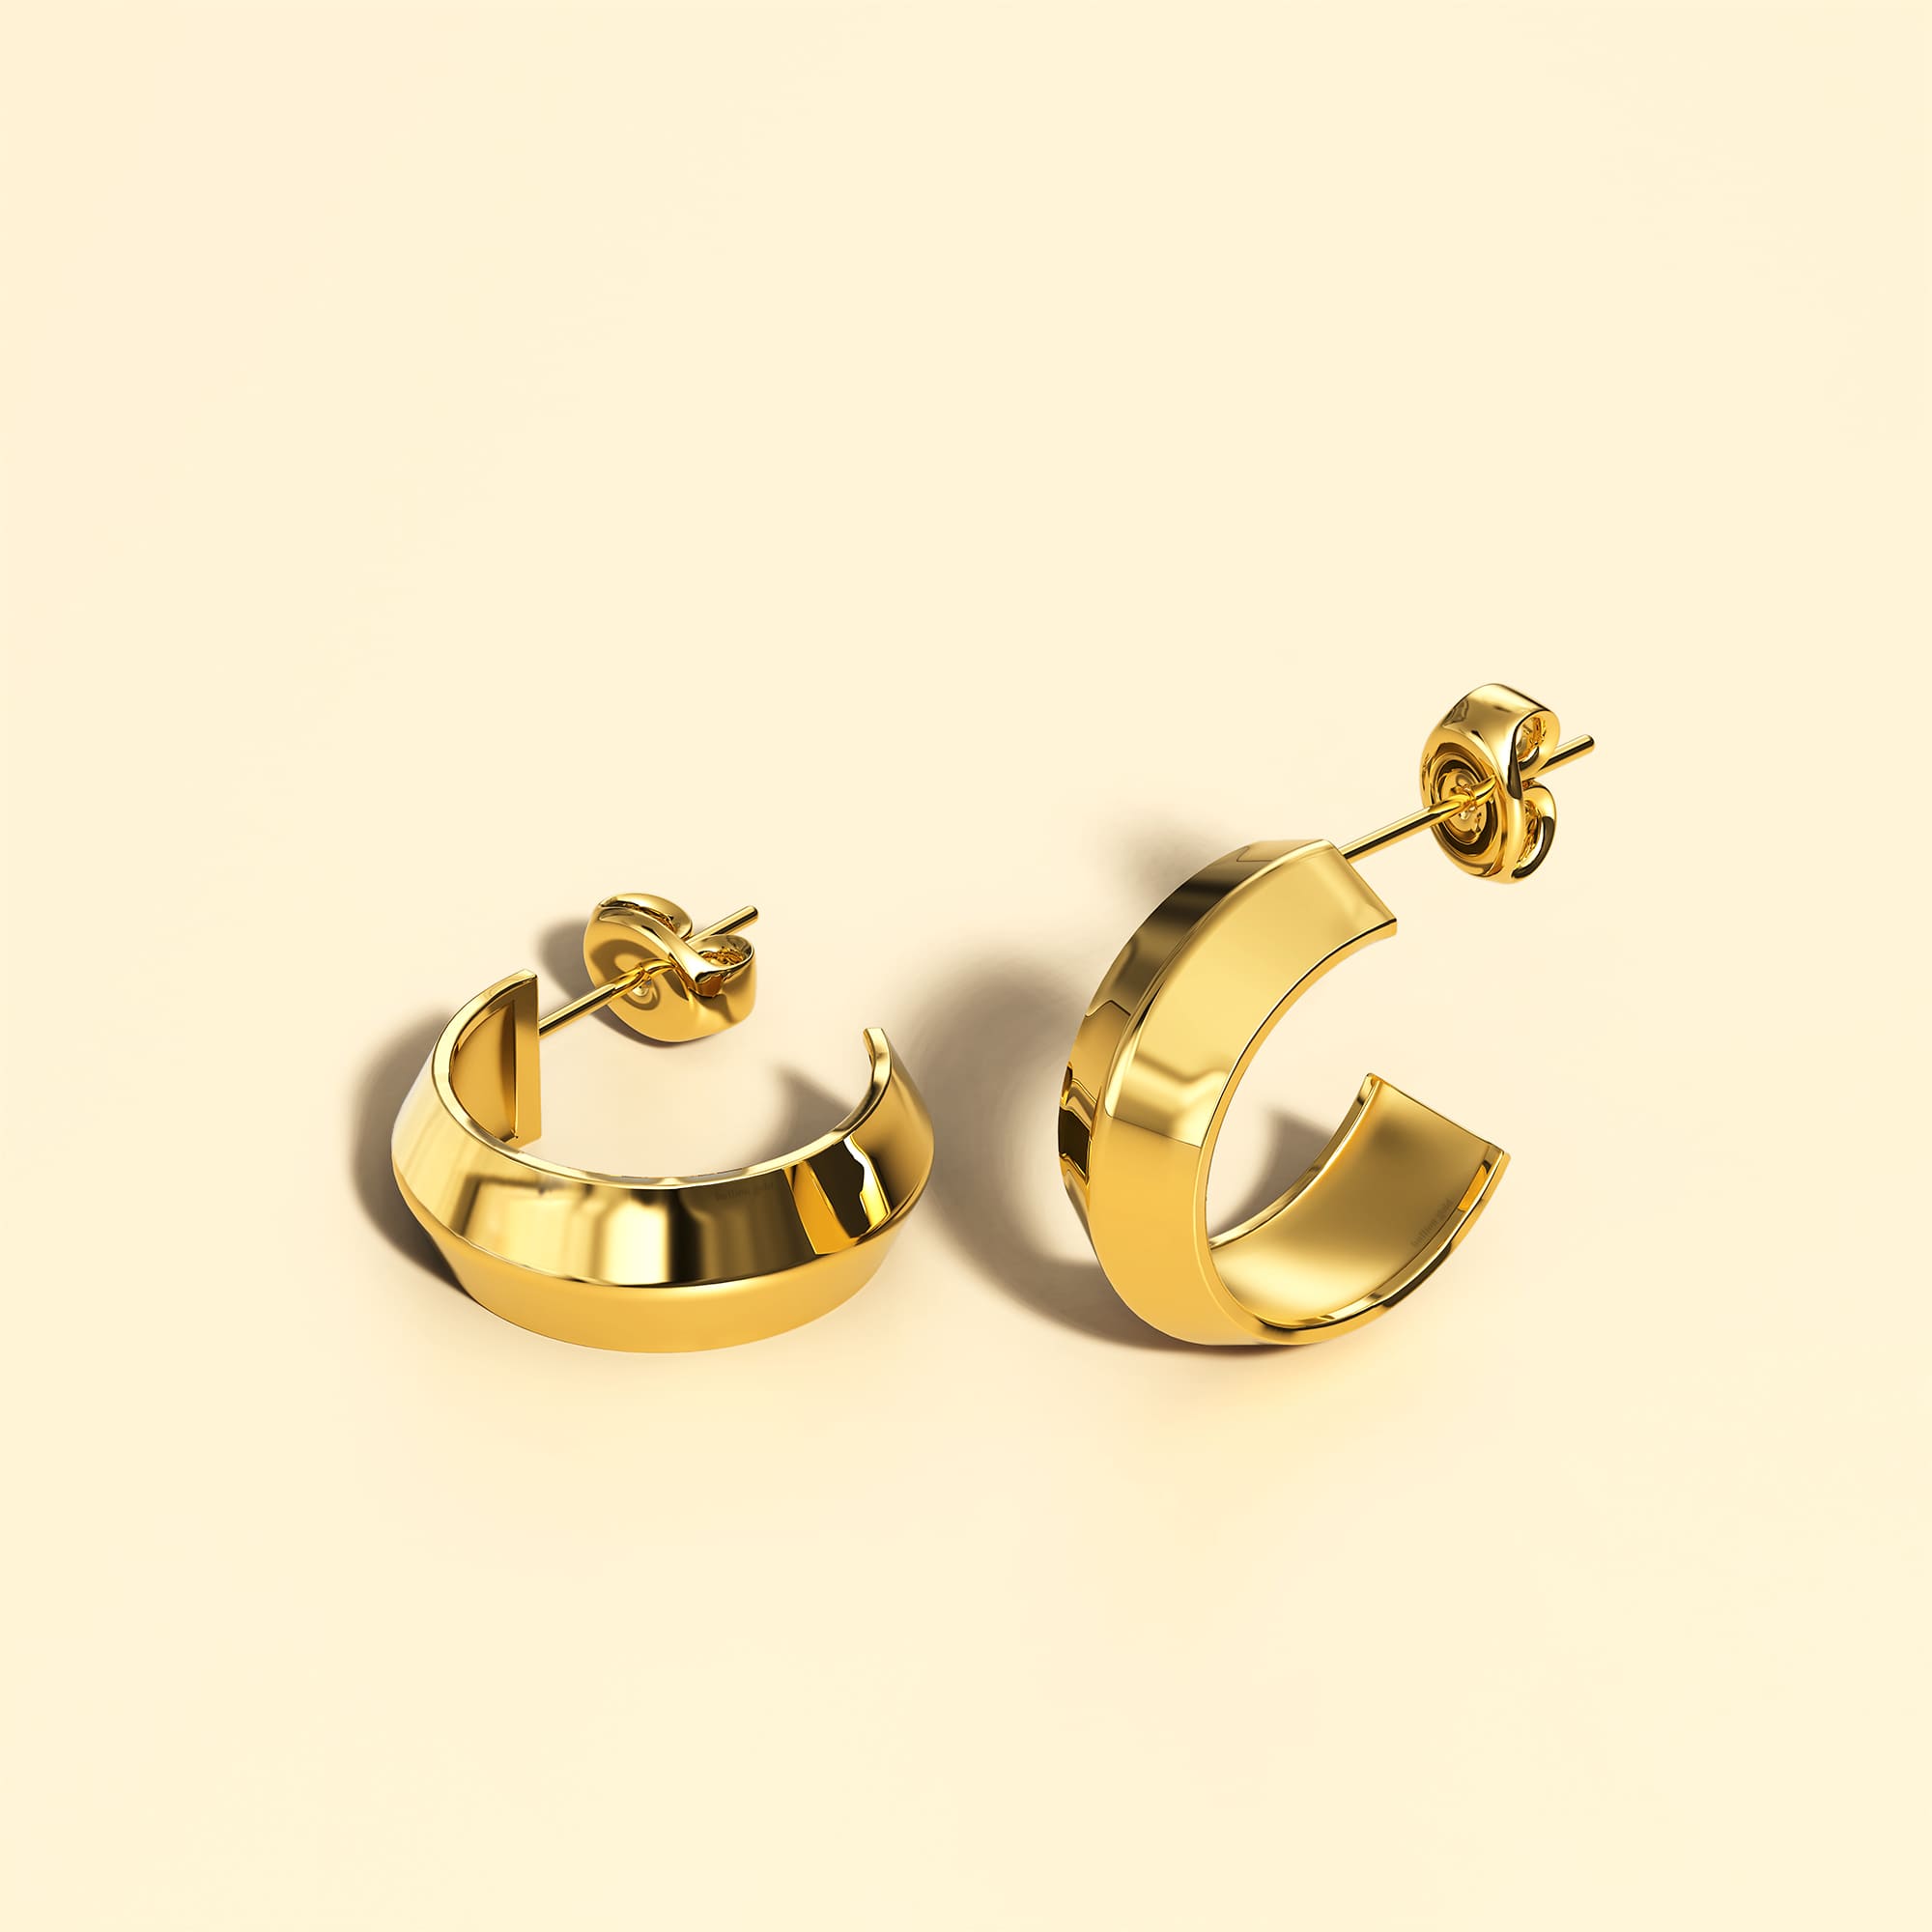 Solid Textured Earrings in Gold